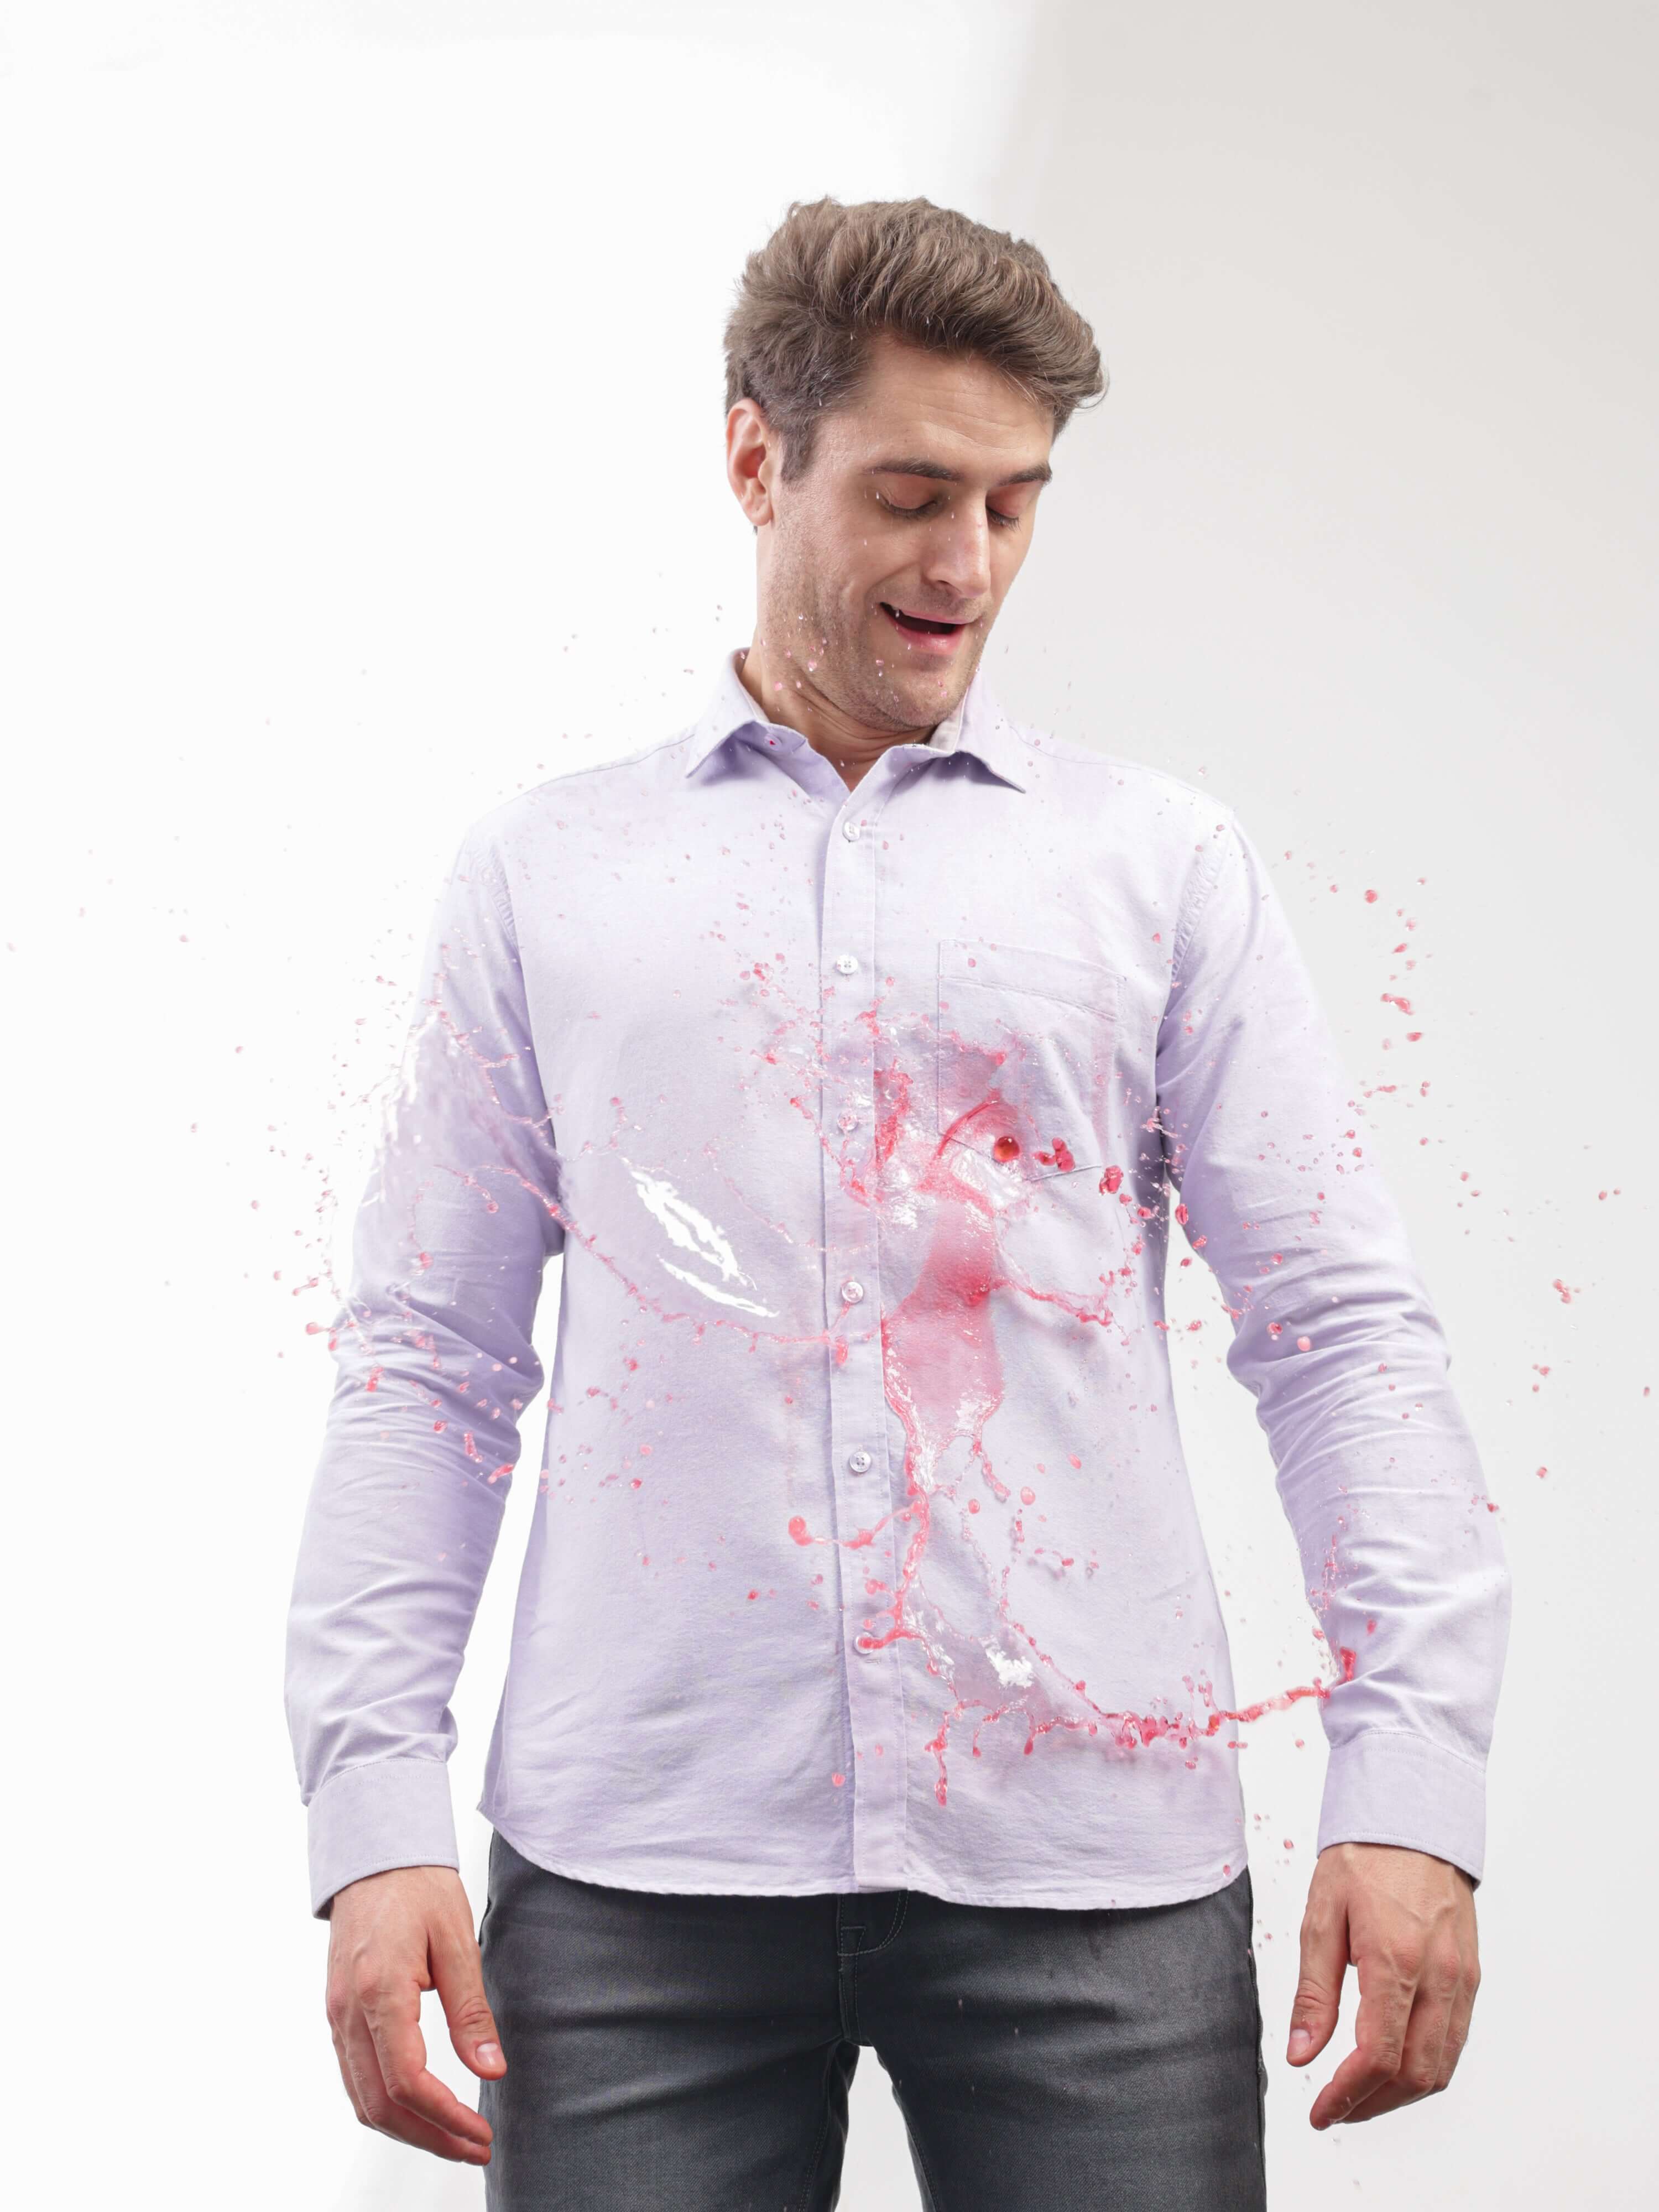 Lavender Haven: Premium Cotton Turms Shirt Experience unmatched elegance with our anti-stain, anti-odour lavender shirt. Made from luxurious combed cotton for lasting quality. INTELLIGENT SHIRTS Rs. 2999.00